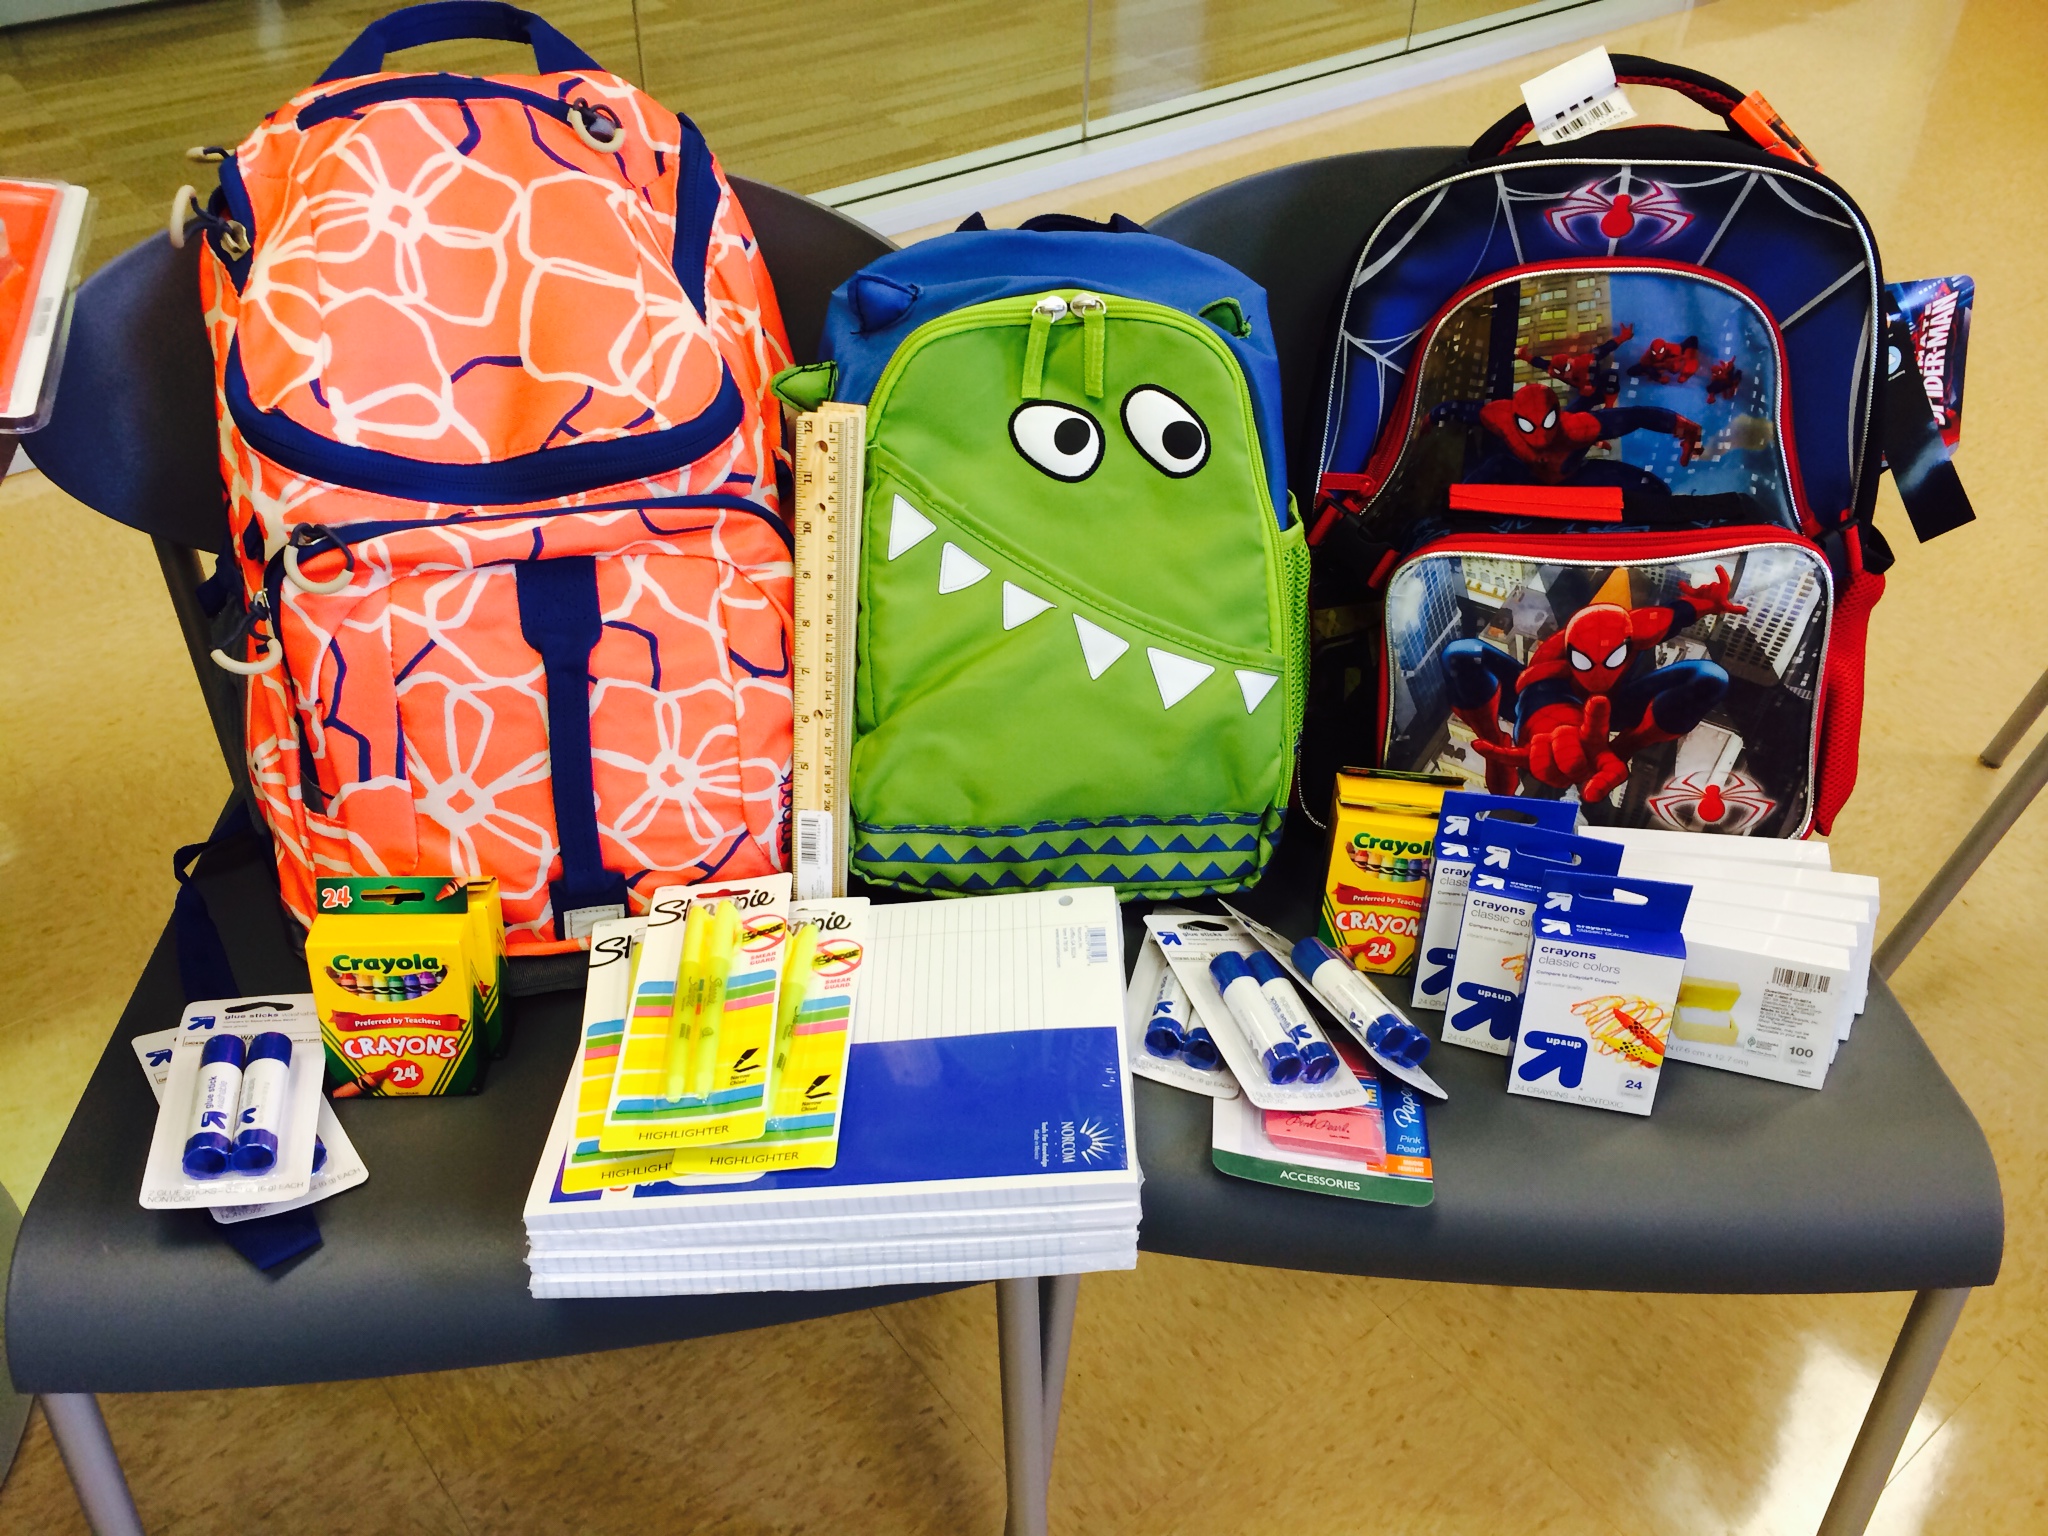 NCORC seeks school supplies and women's items